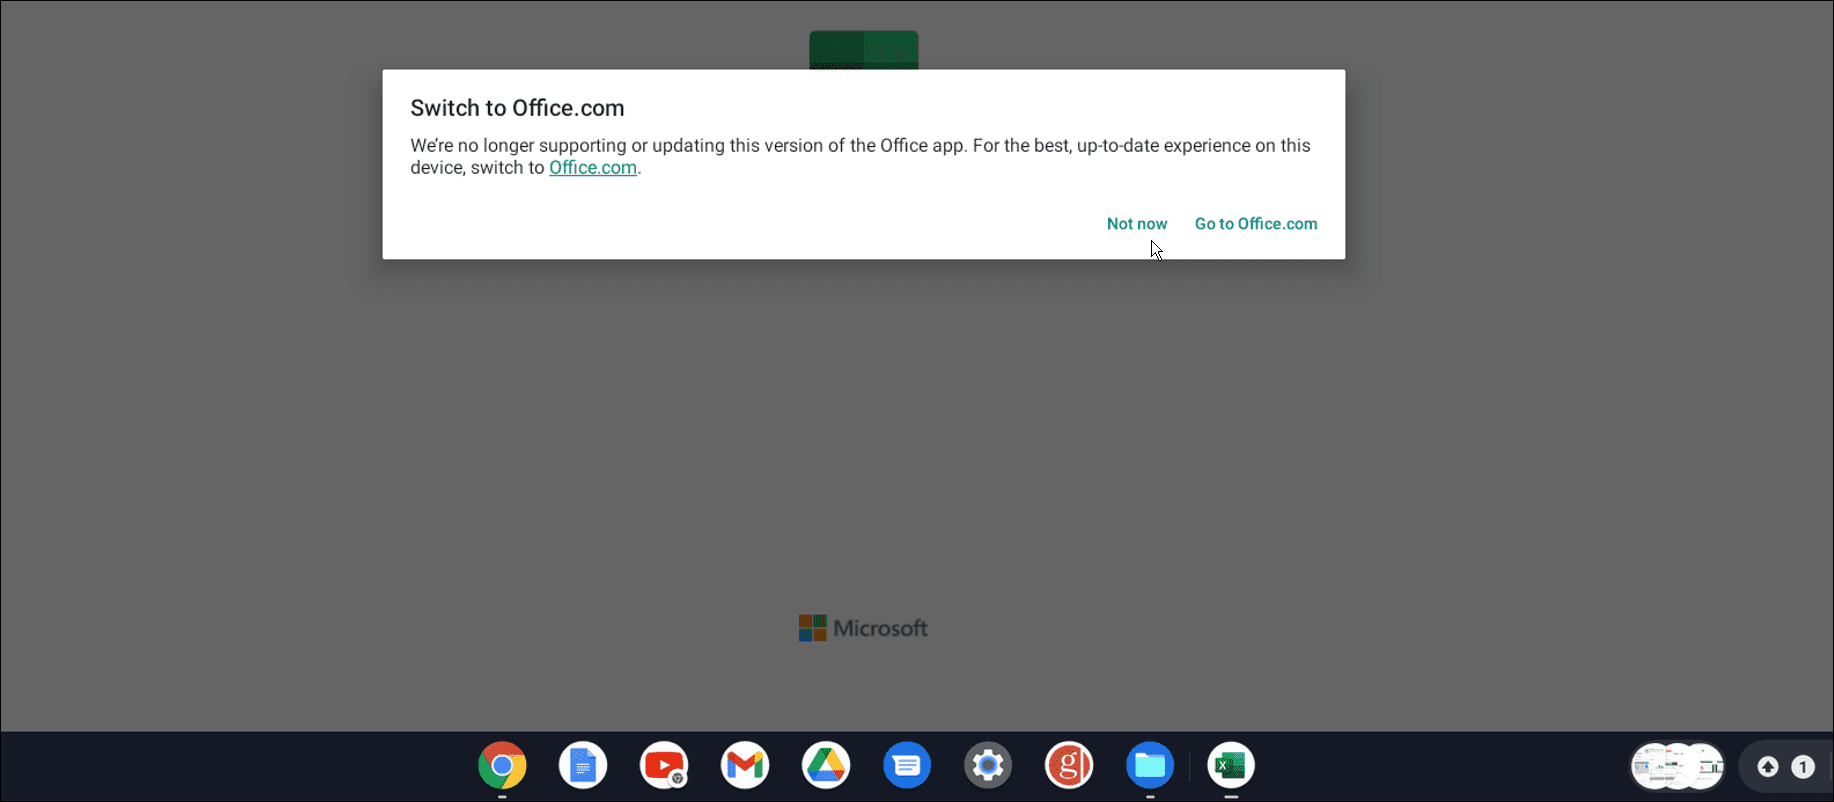 android office app chromebook not supported